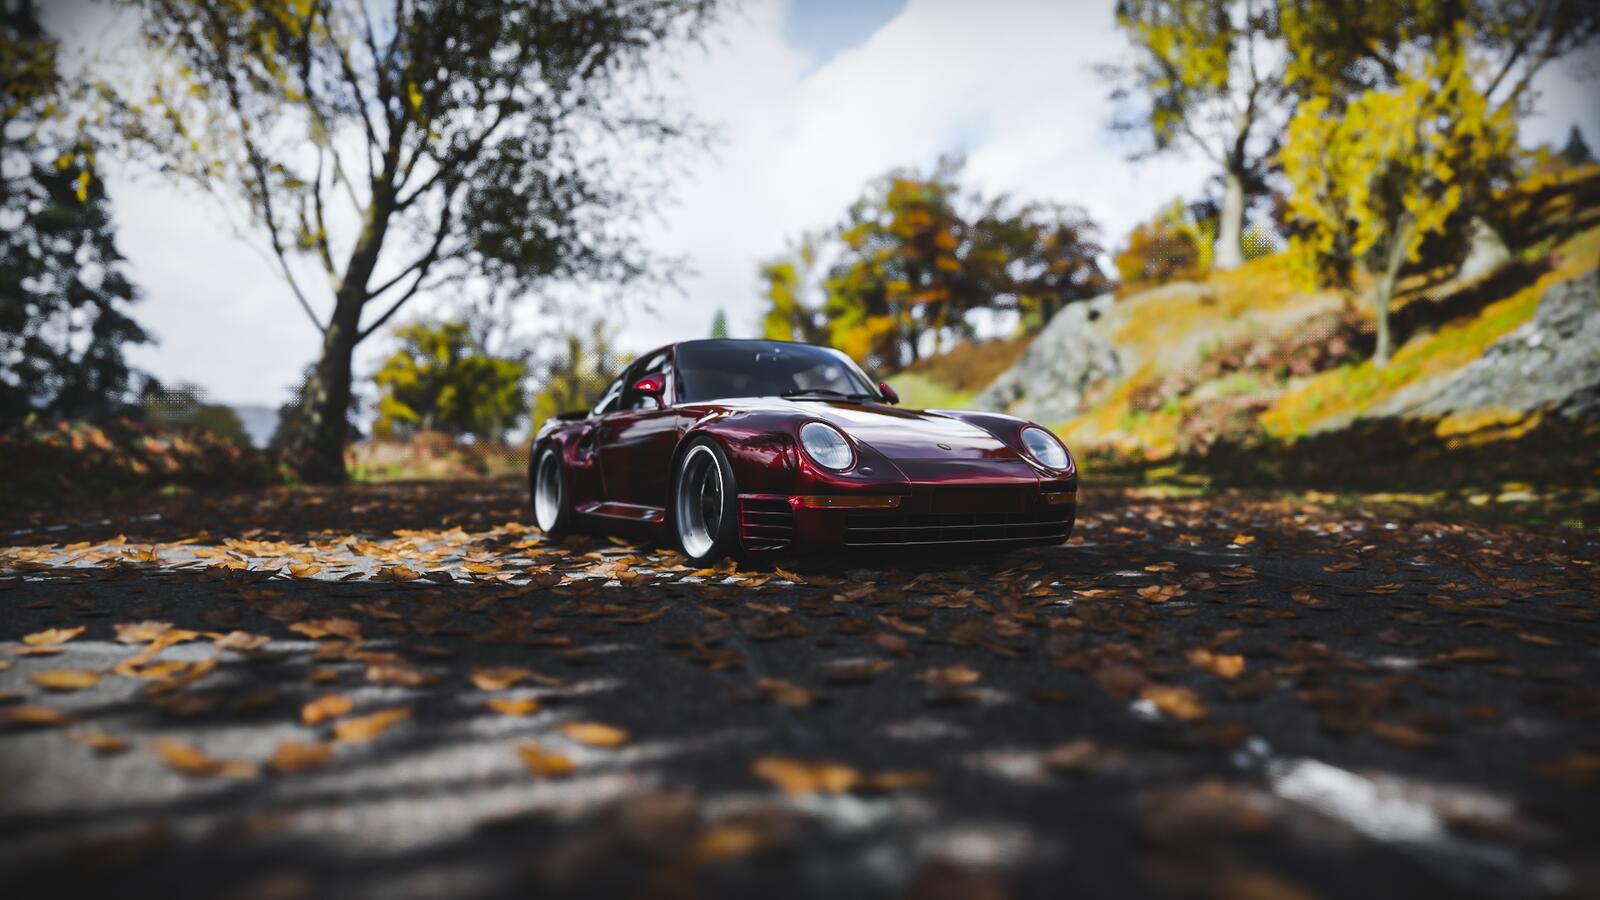 Free photo Red porsche 959 stands on the road with fallen leaves